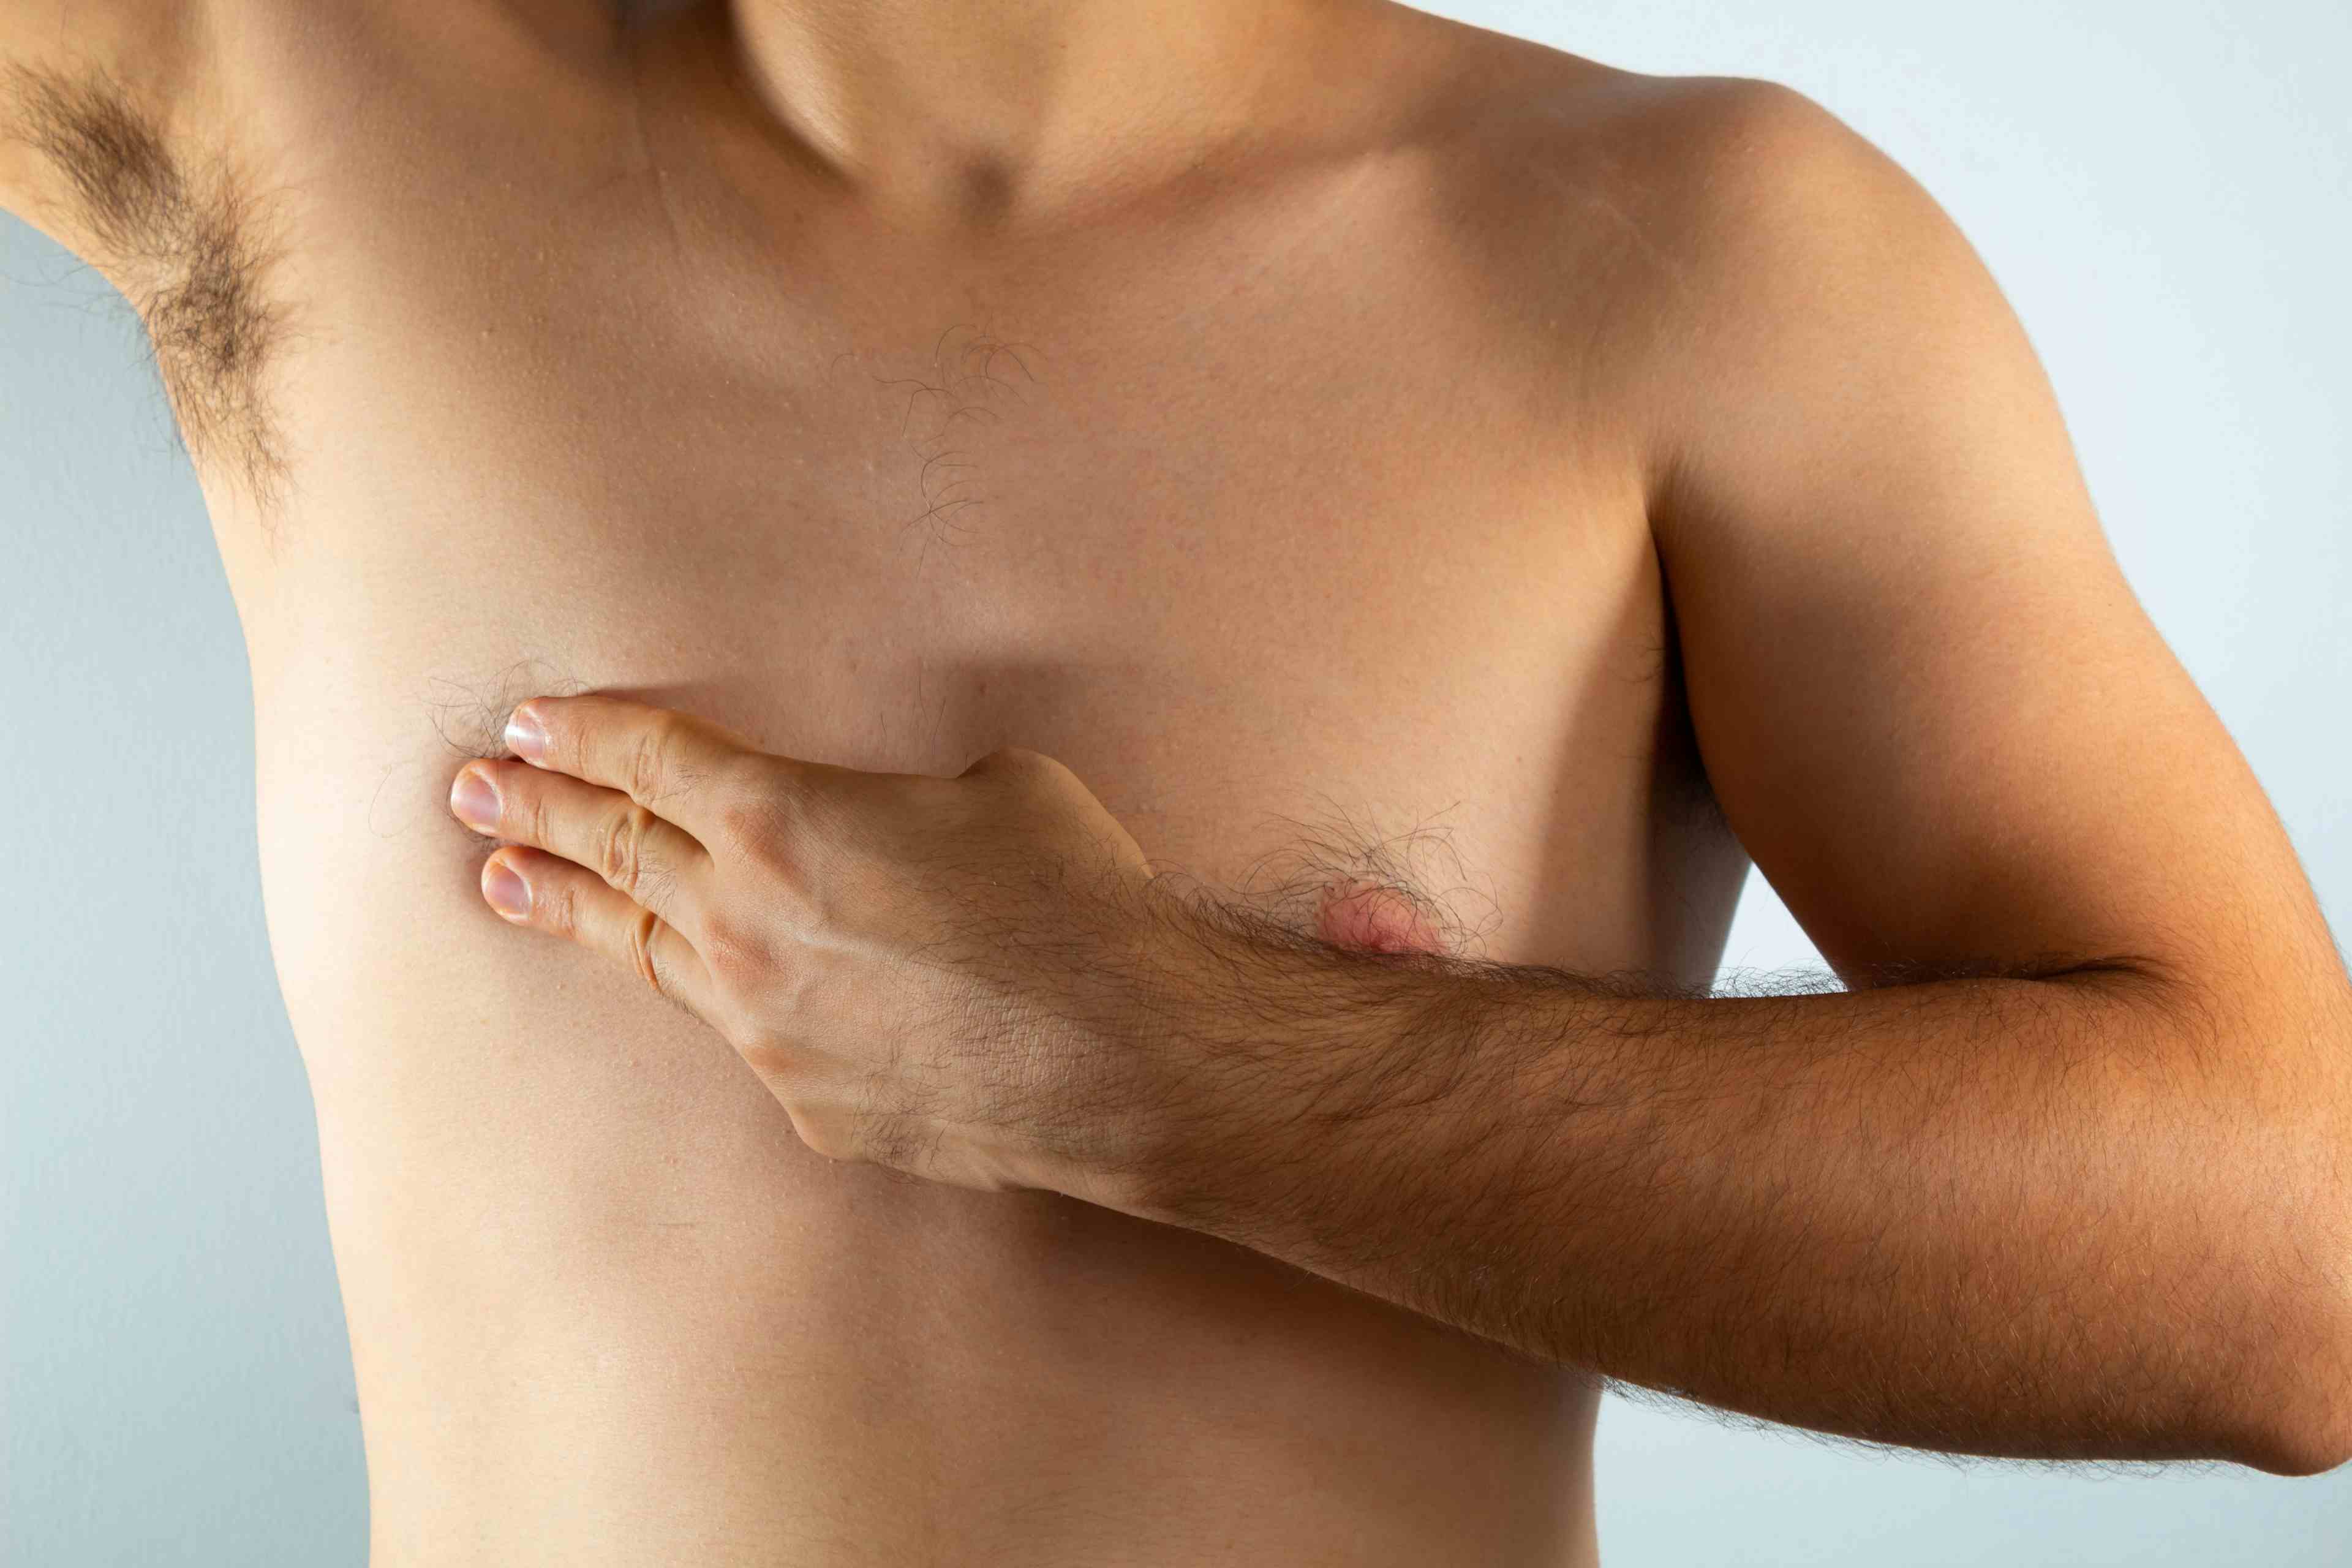 close up of a man's chest looking for signs of male breast cancer | Image Credit: © Antonio Tanaka - stock.adobe.com.